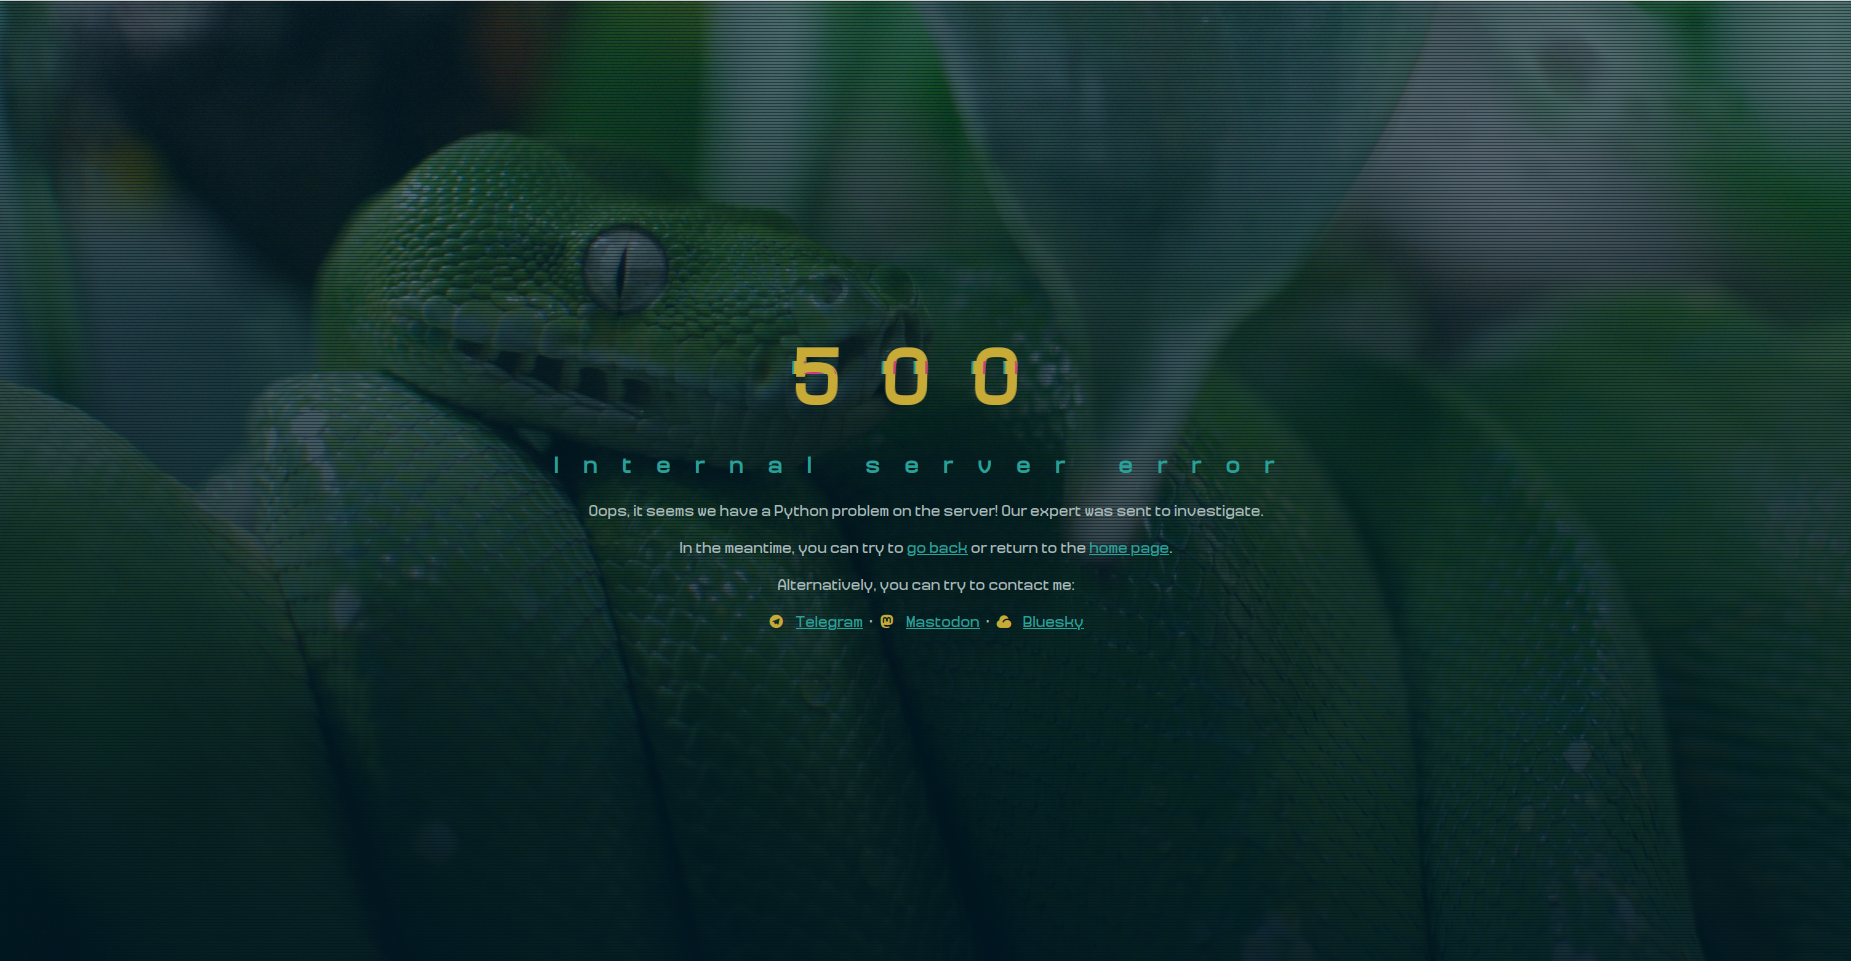 Screenshot showing a "500" in large yellow characters, followed by a text indicating that this is an error in the site's Python code. A photo of a green tree python, darkened and interlaced with dark lines, appears in the background.